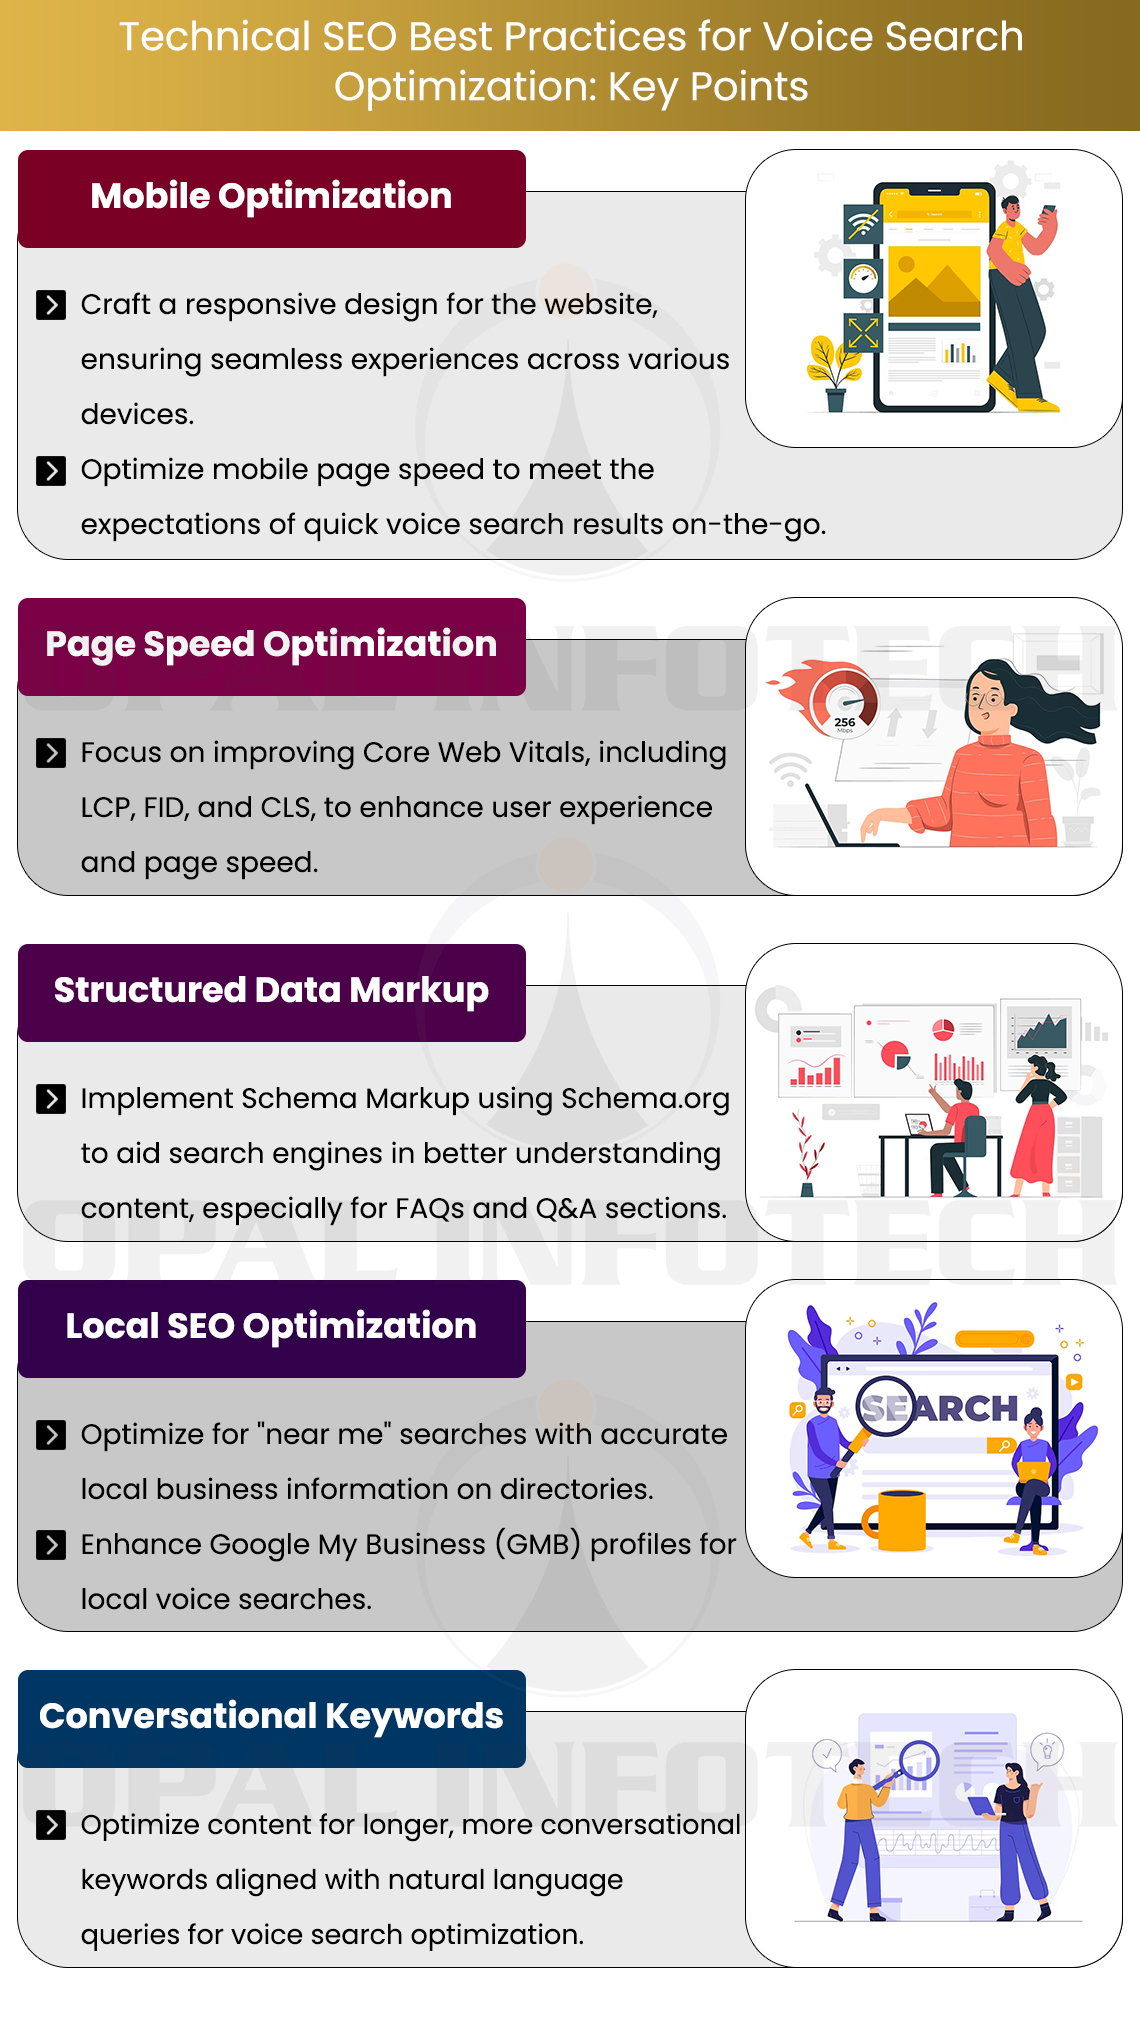 Technical SEO Best Practices for Voice Search Optimization